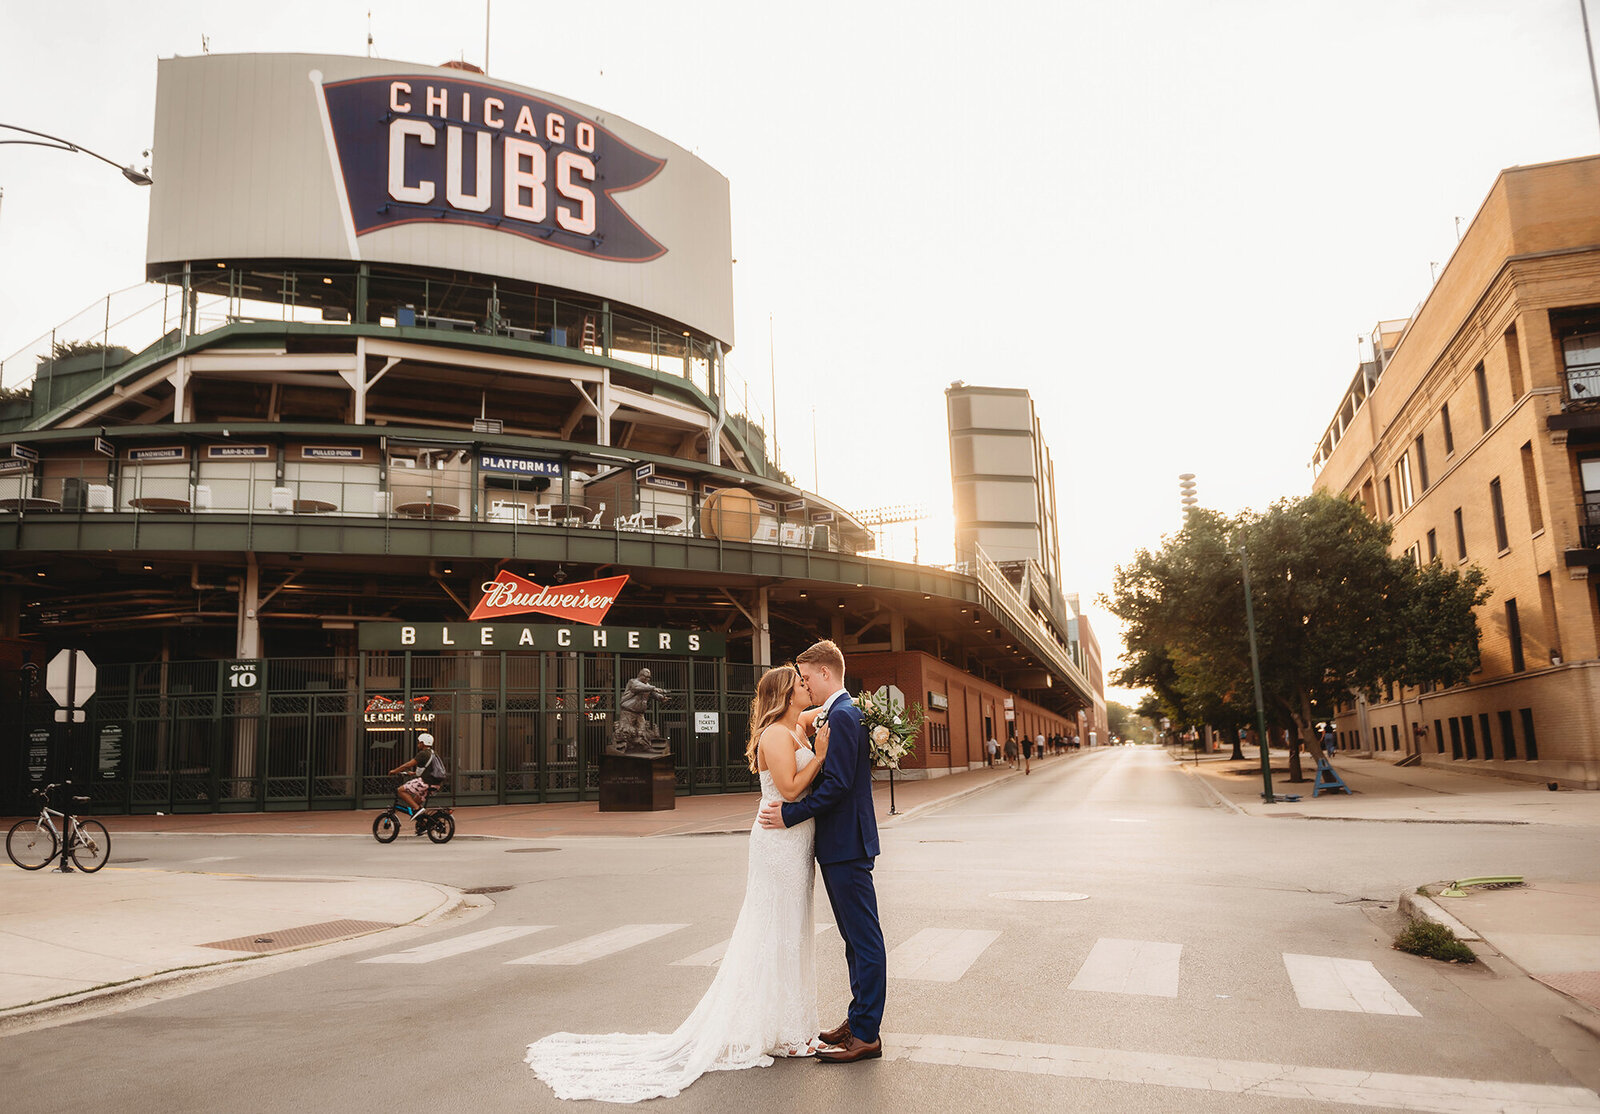 Bride & Groom pose for newlywed portraits after their Micro-Wedding in Chicago, IL.